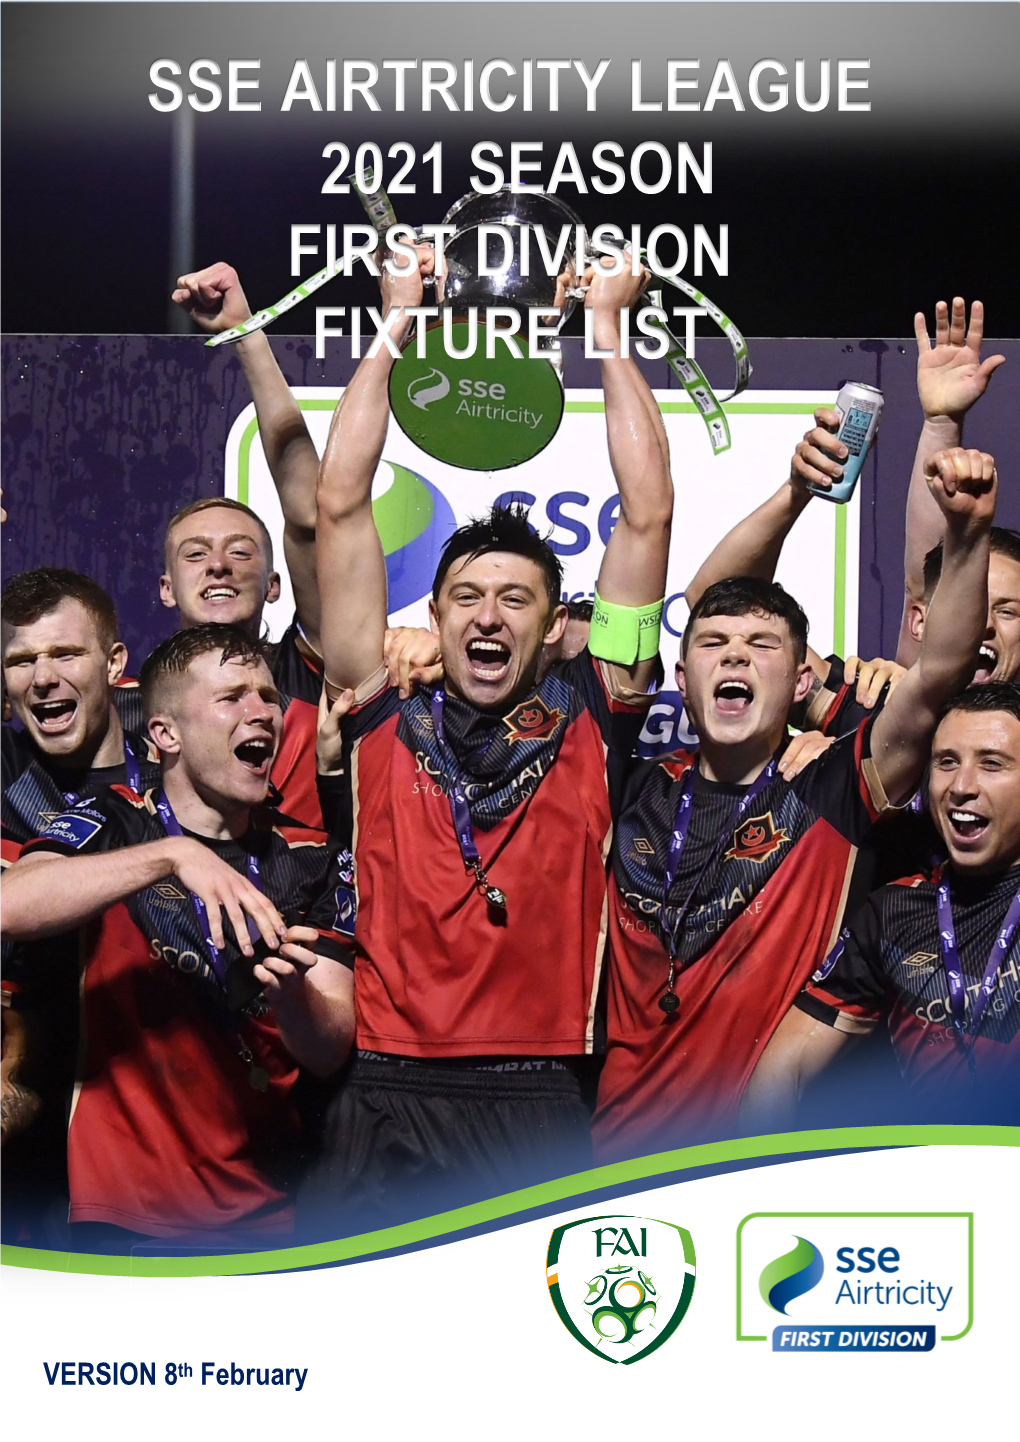 2021 SSE Airtricity League First Division Fixtures